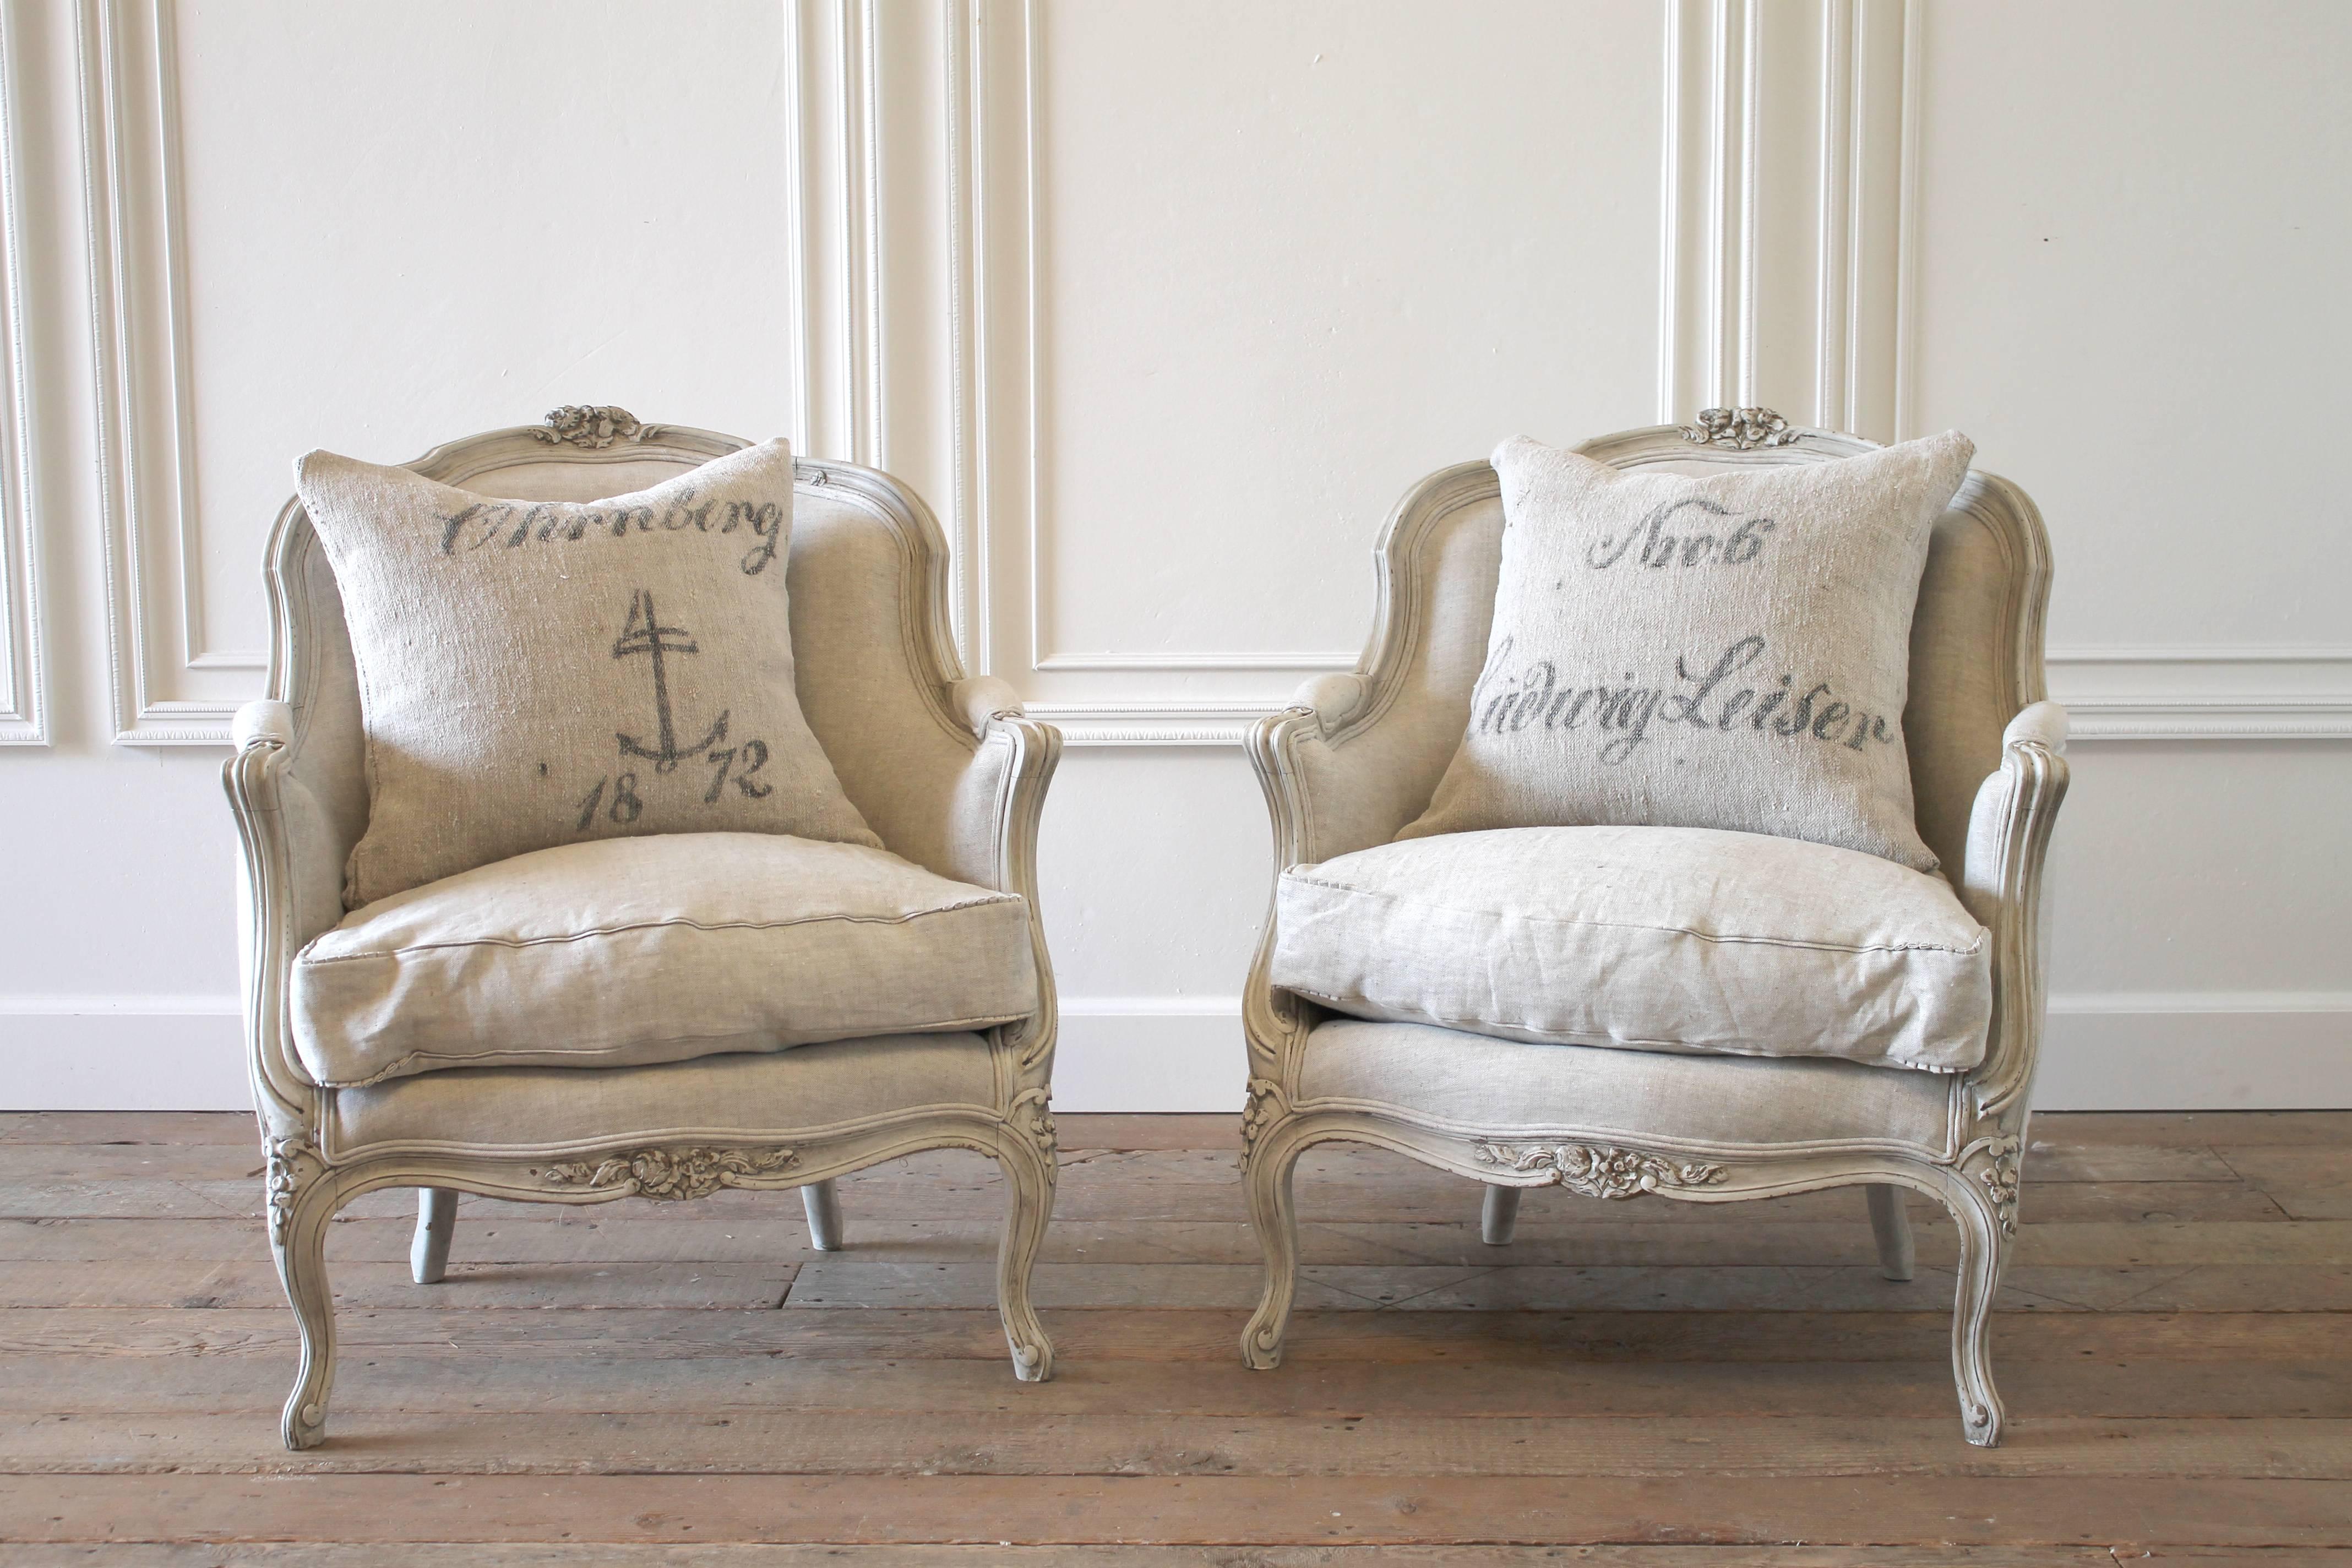 Fabulous pair of Louis XV style bergeres, painted in our signature oyster white finish, highlighted with an antique glaze to give the look of a time worn patina. Chairs are solid carved walnut, and very solid and sturdy, ready for everyday use. The